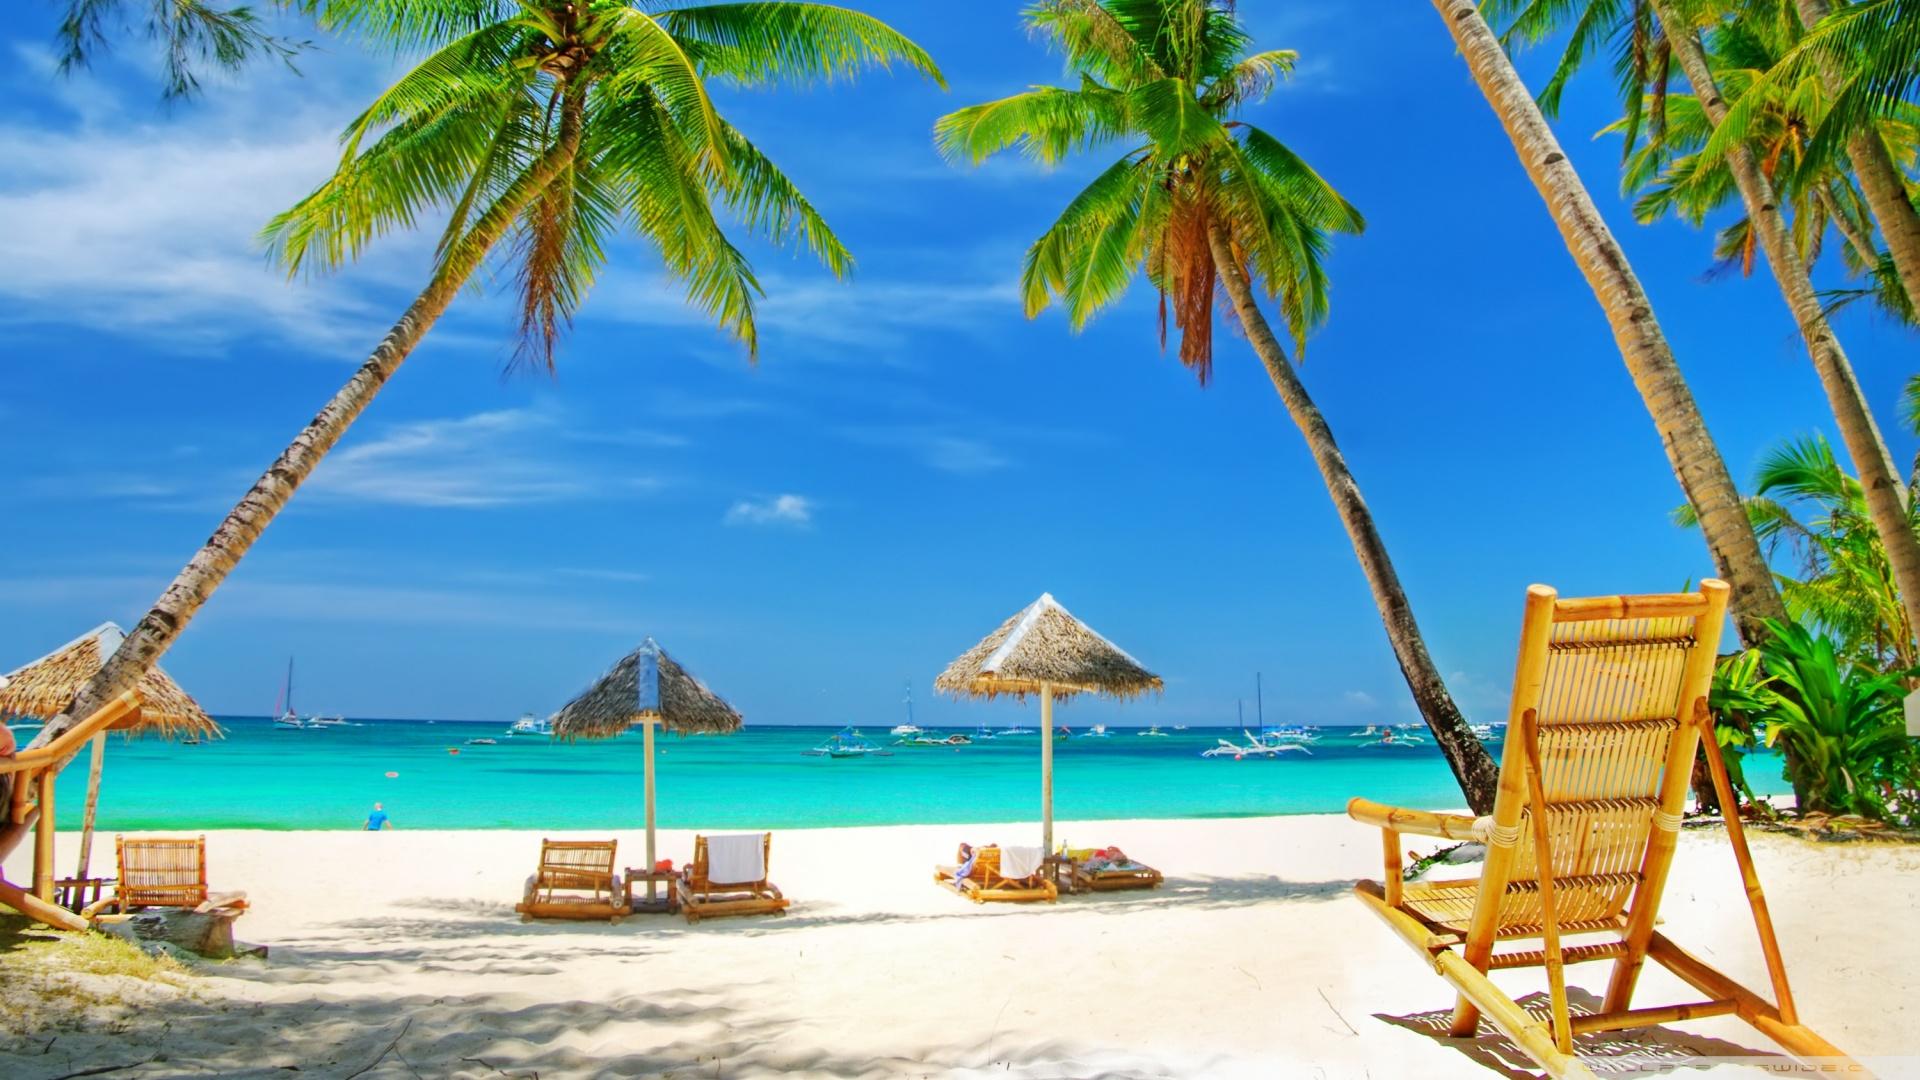 hd wallpaper paradise beach wallpapers55com   Best Wallpapers for